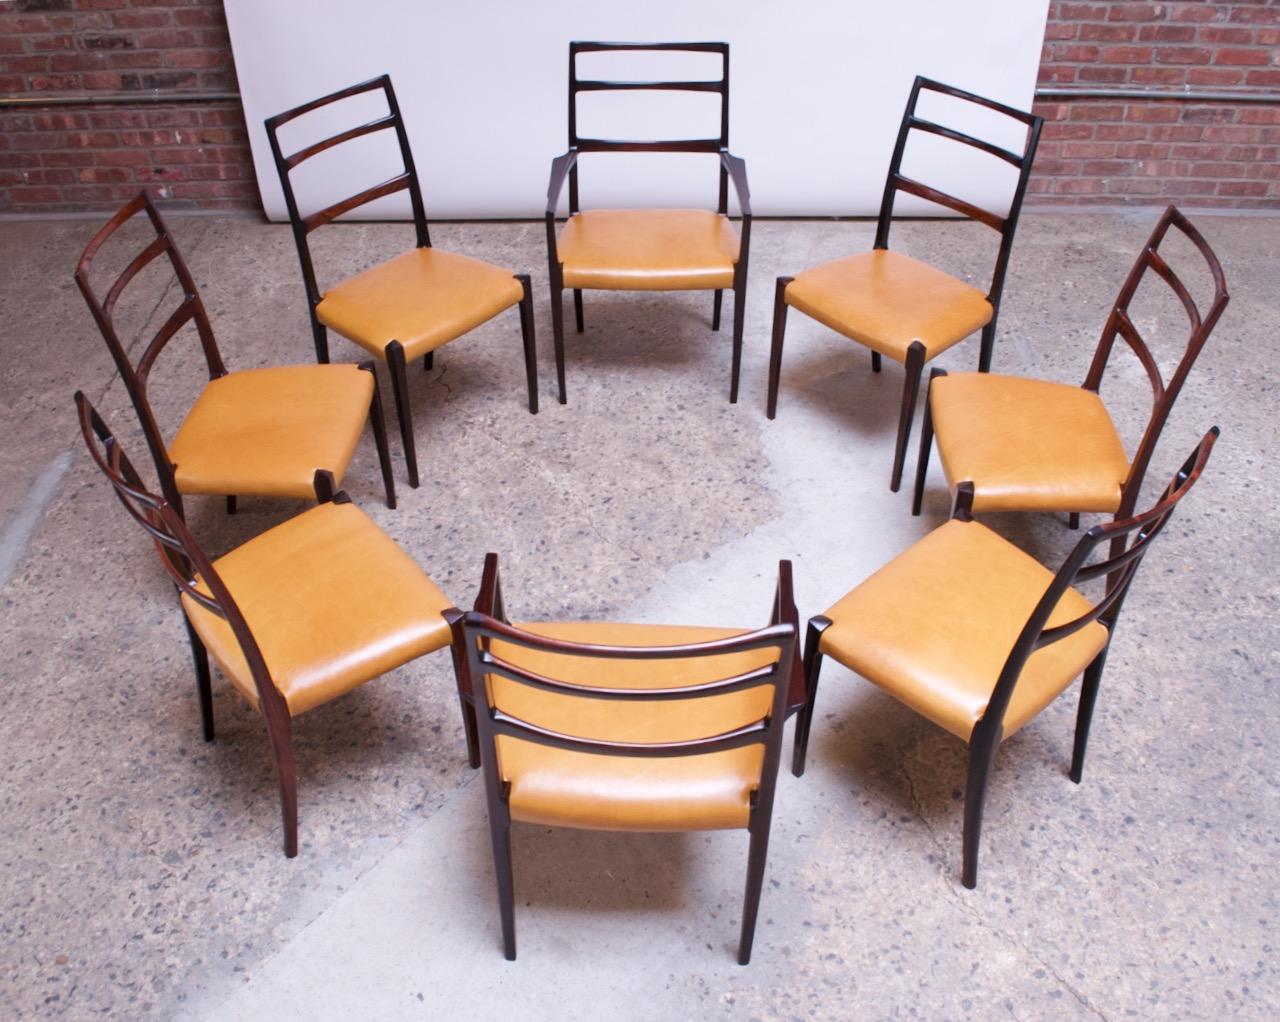 Impressive set of eight ladder-back dining chairs (six side, two captain) in rosewood attributed to Sorø Stolefabrik (circa 1960s, Denmark). From the luxe materials utilized to the exemplary craftsmanship / assembly, this exceptional set is of the